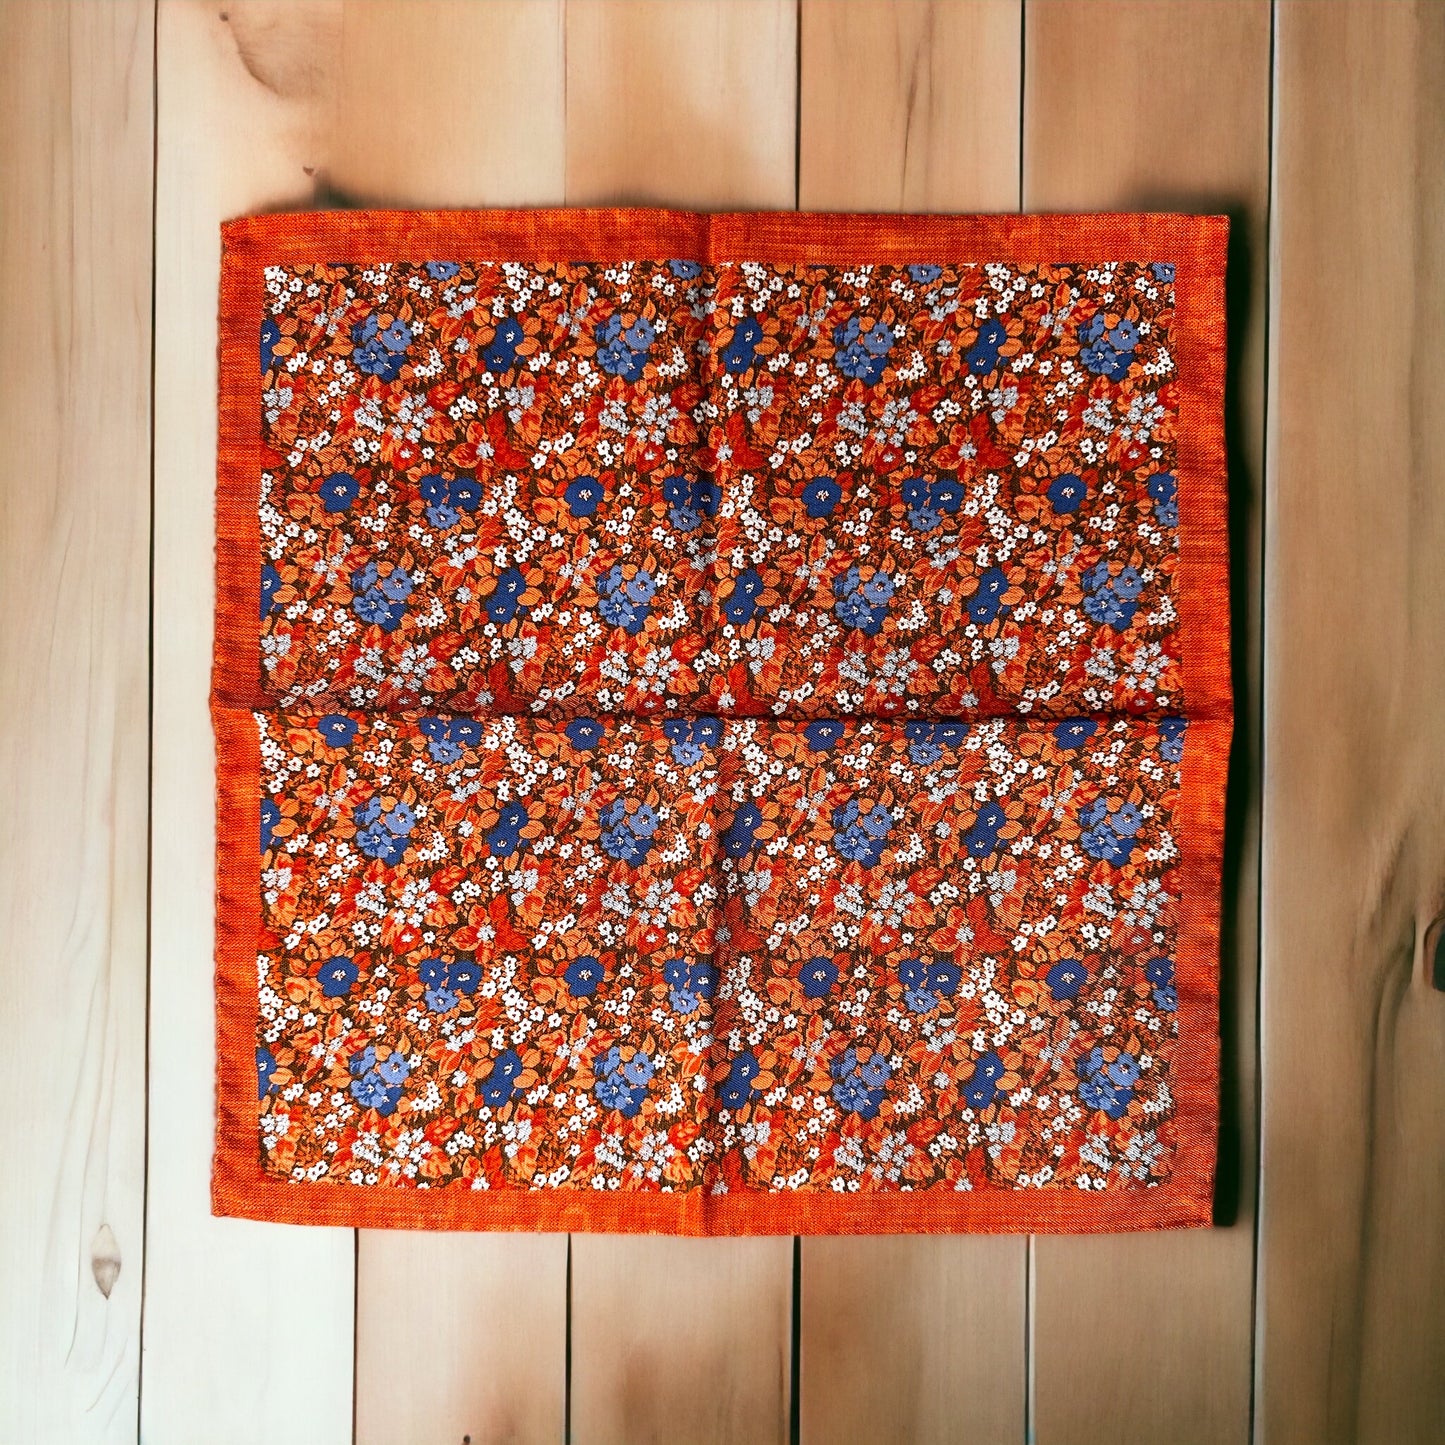 Hand rolled edges on this silk pocket square create gorgeous points that keep their position when using the breast pocket on a jacket. The orange silk with light blue mini floral design and white min daisies is a stunning classic all around geometric design. On the reverse is a different fun pattern of different colorful and shaped stripes. A fun and playful pocket square for every occasion.